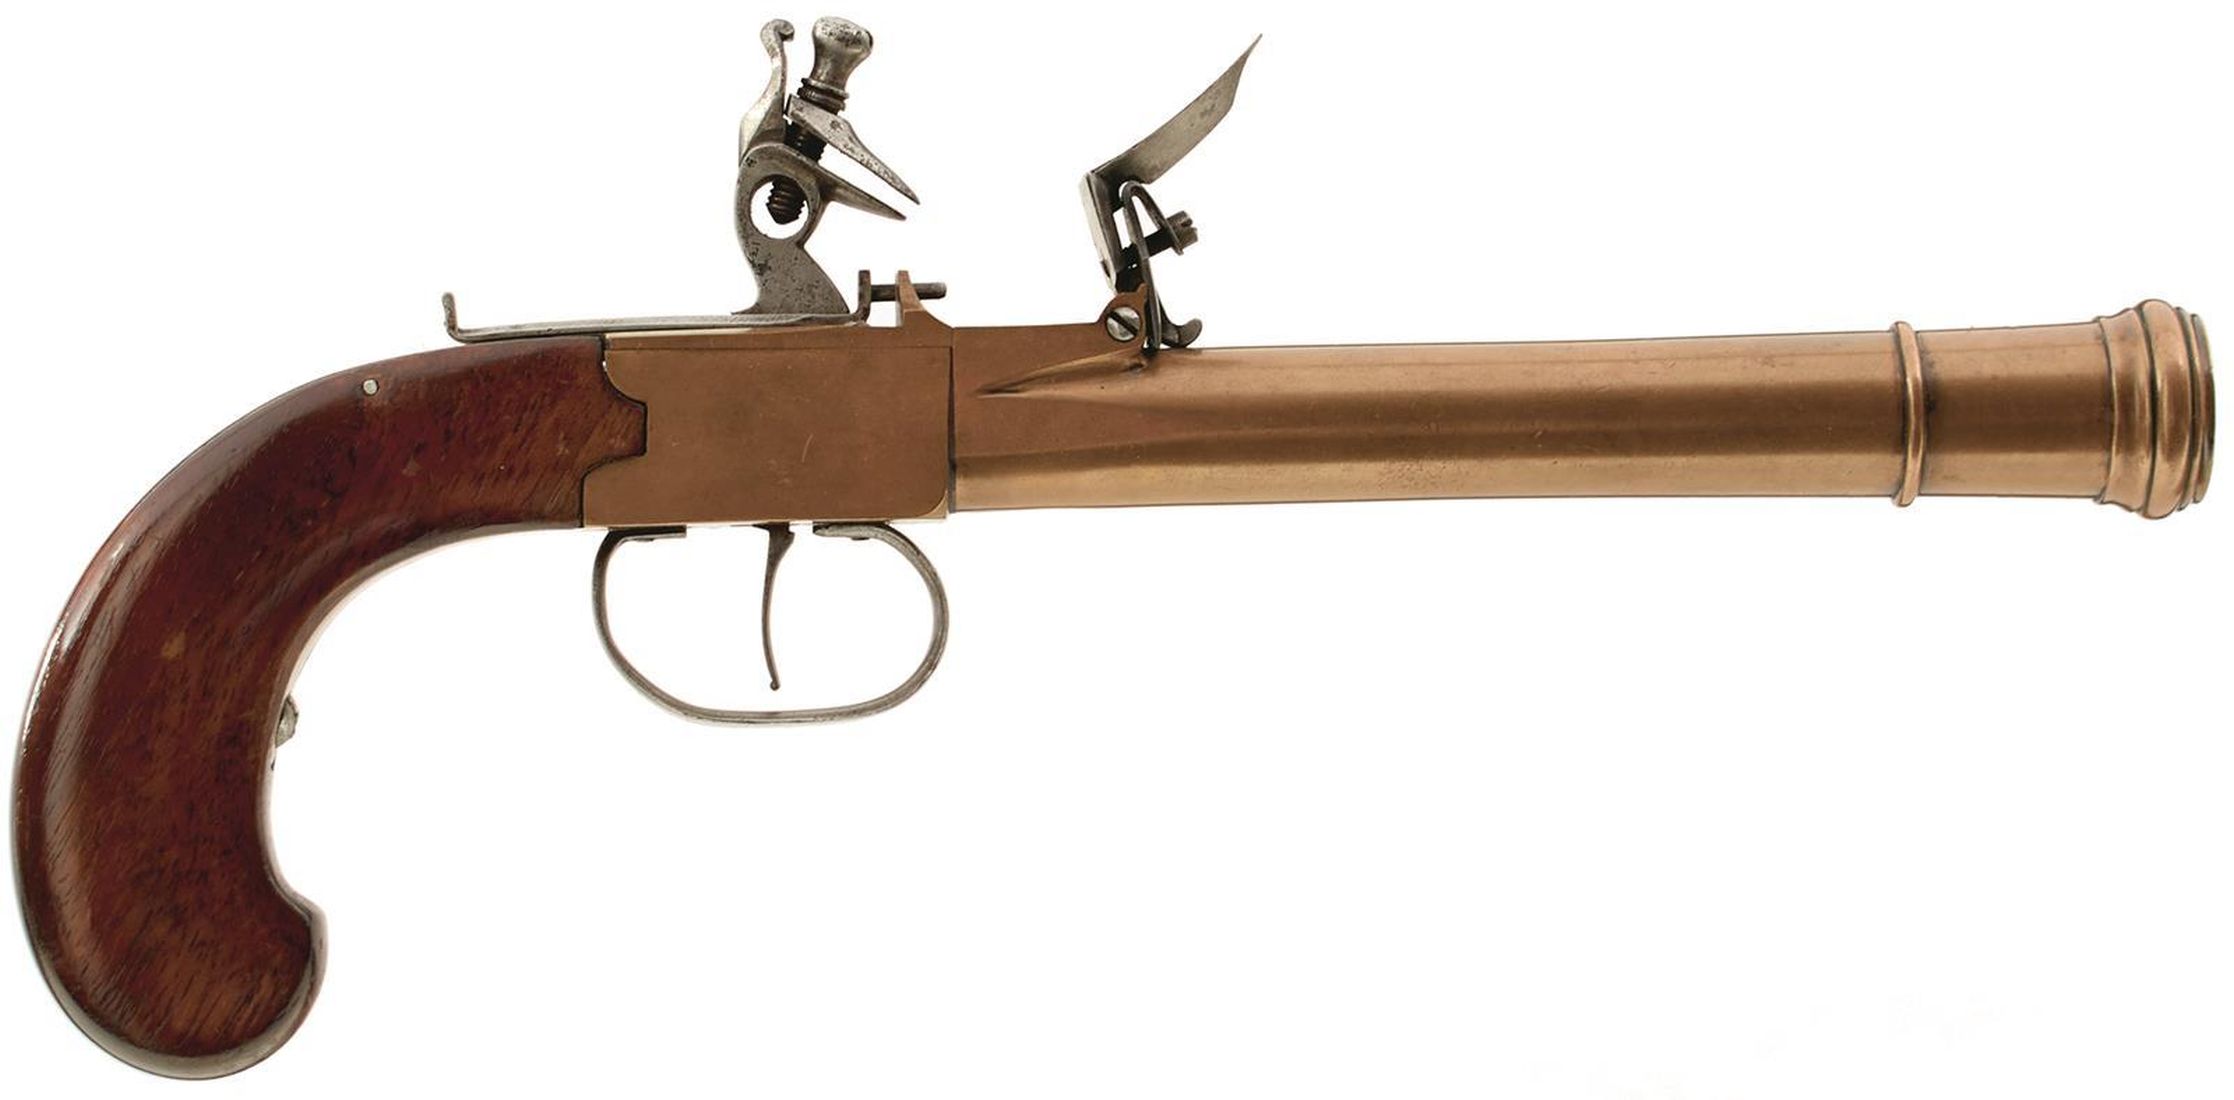 A 15-BORE BRASS BLUNDERBUSS PISTOL, 6.5inch barrel with ring turned muzzle, plain action, sliding